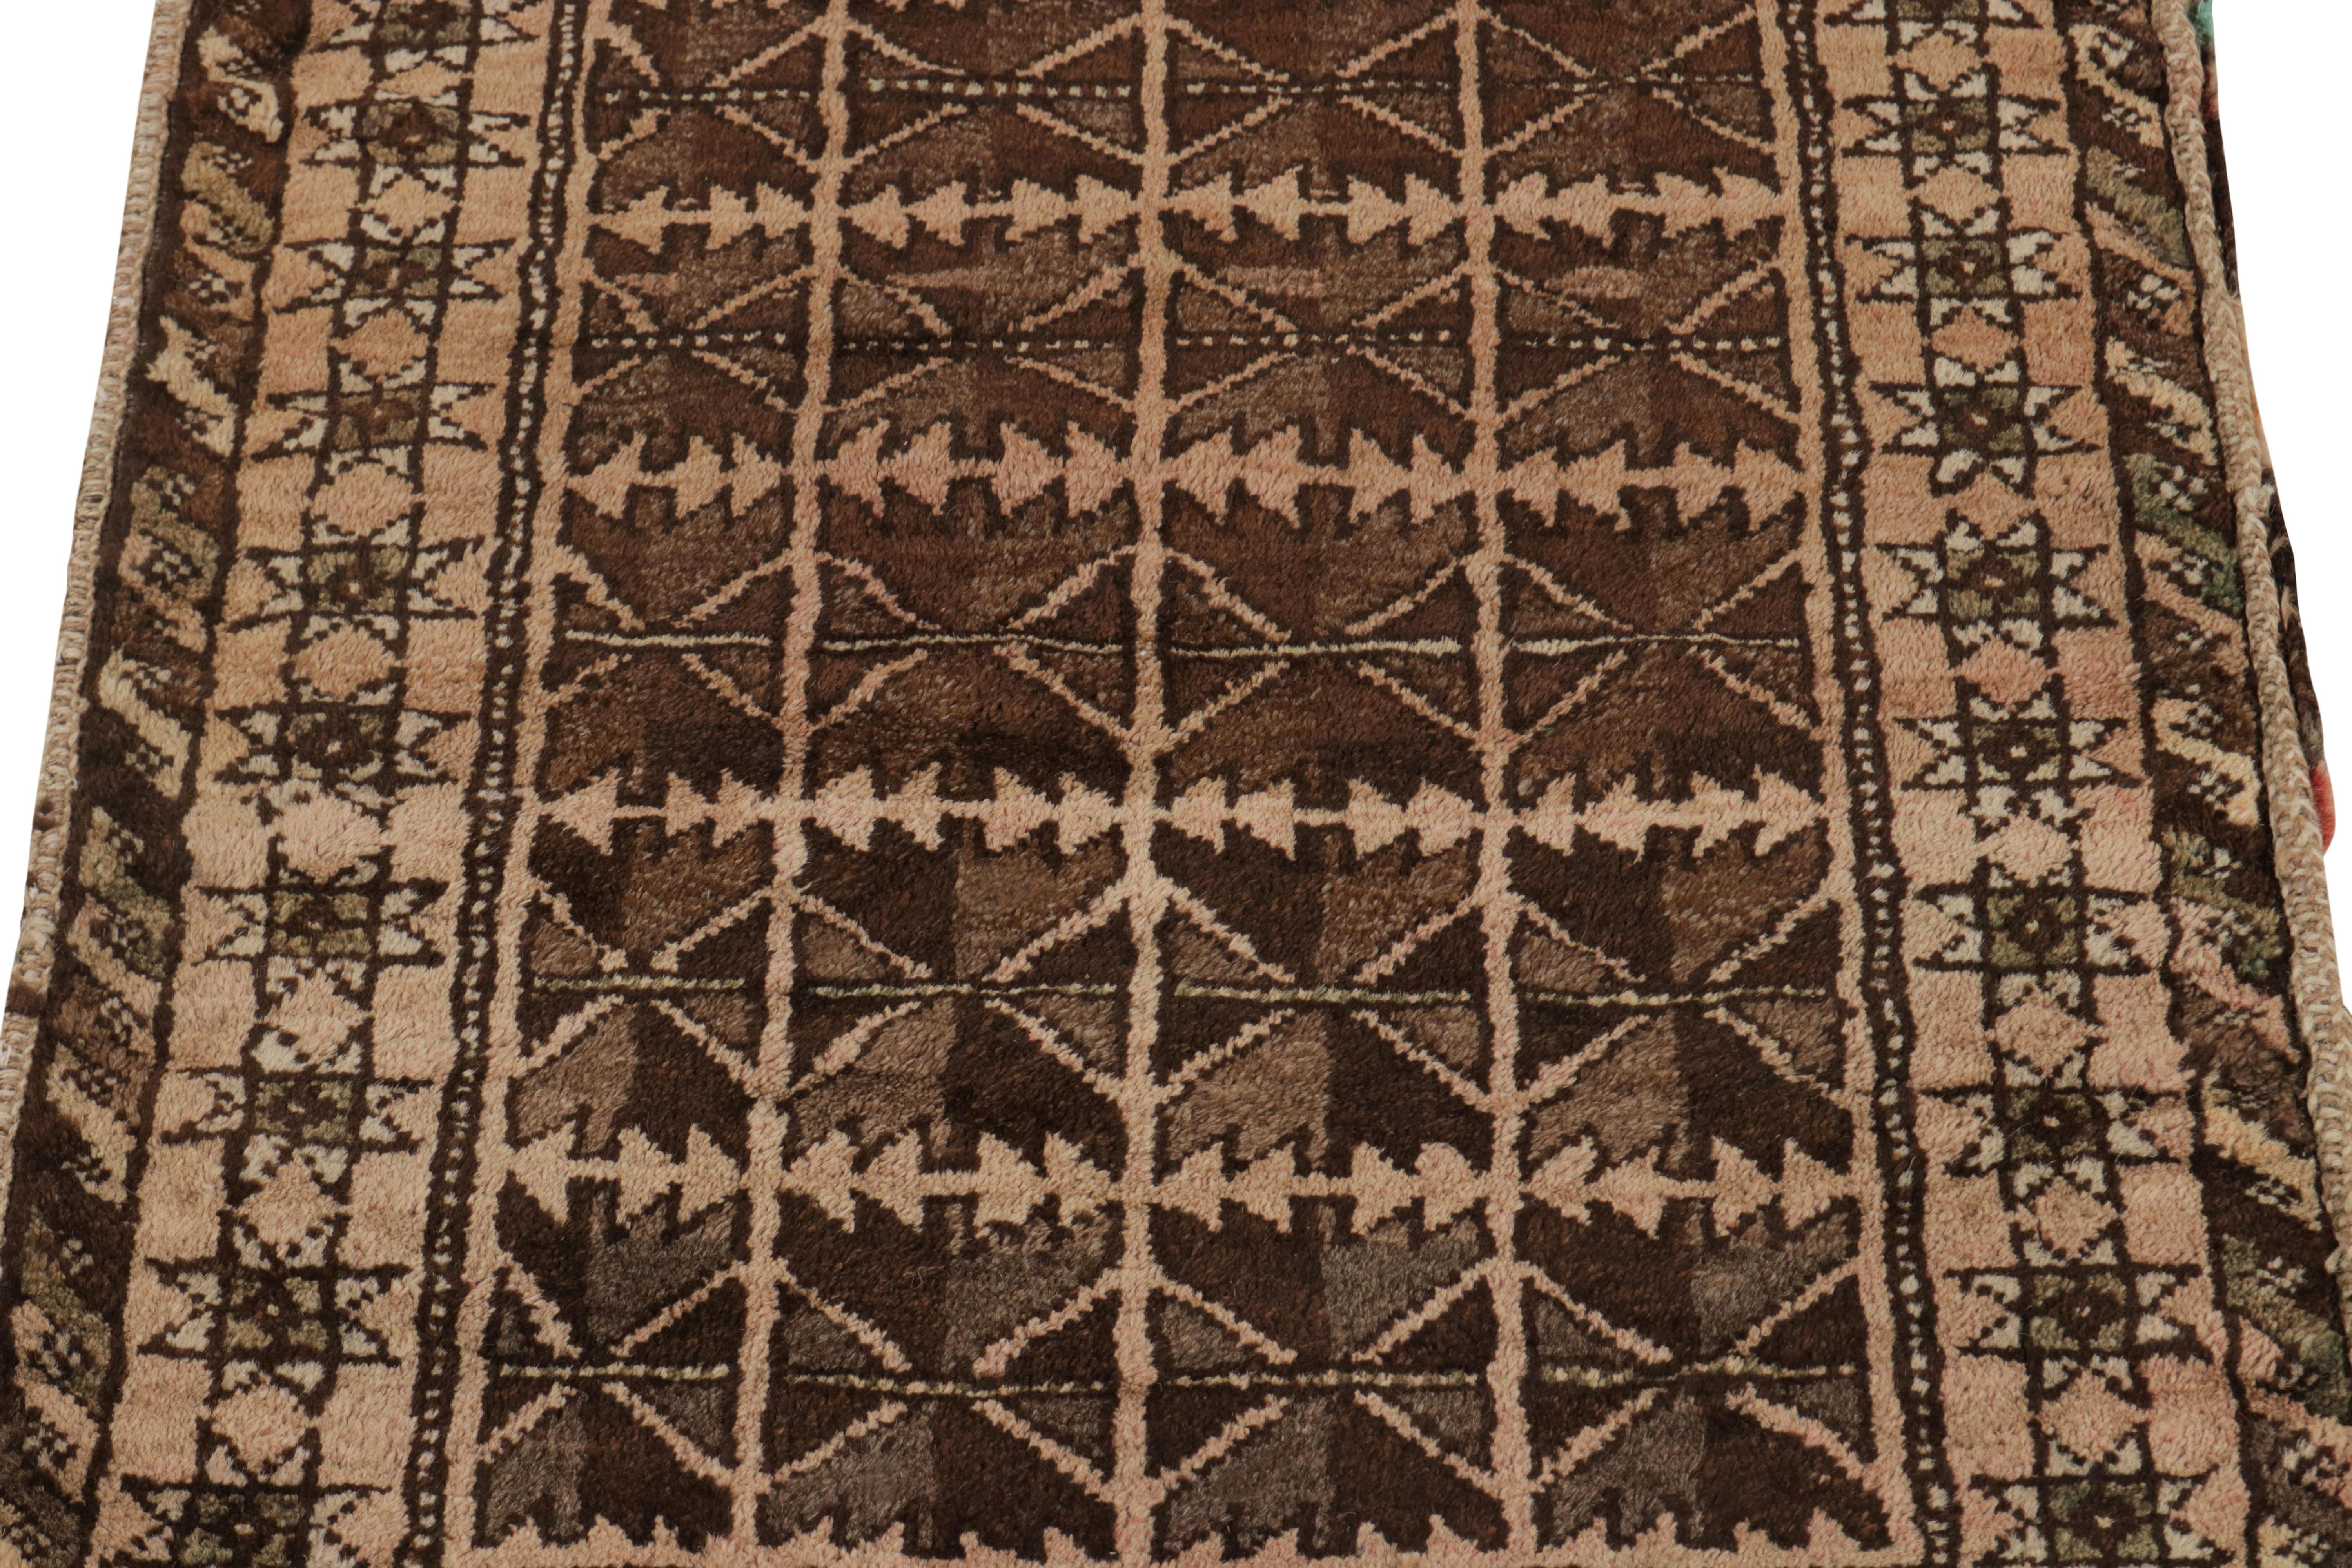 Pakistani Antique Baluch Persian Rug in Beige-Brown Geometric Pattern by Rug & Kilim For Sale